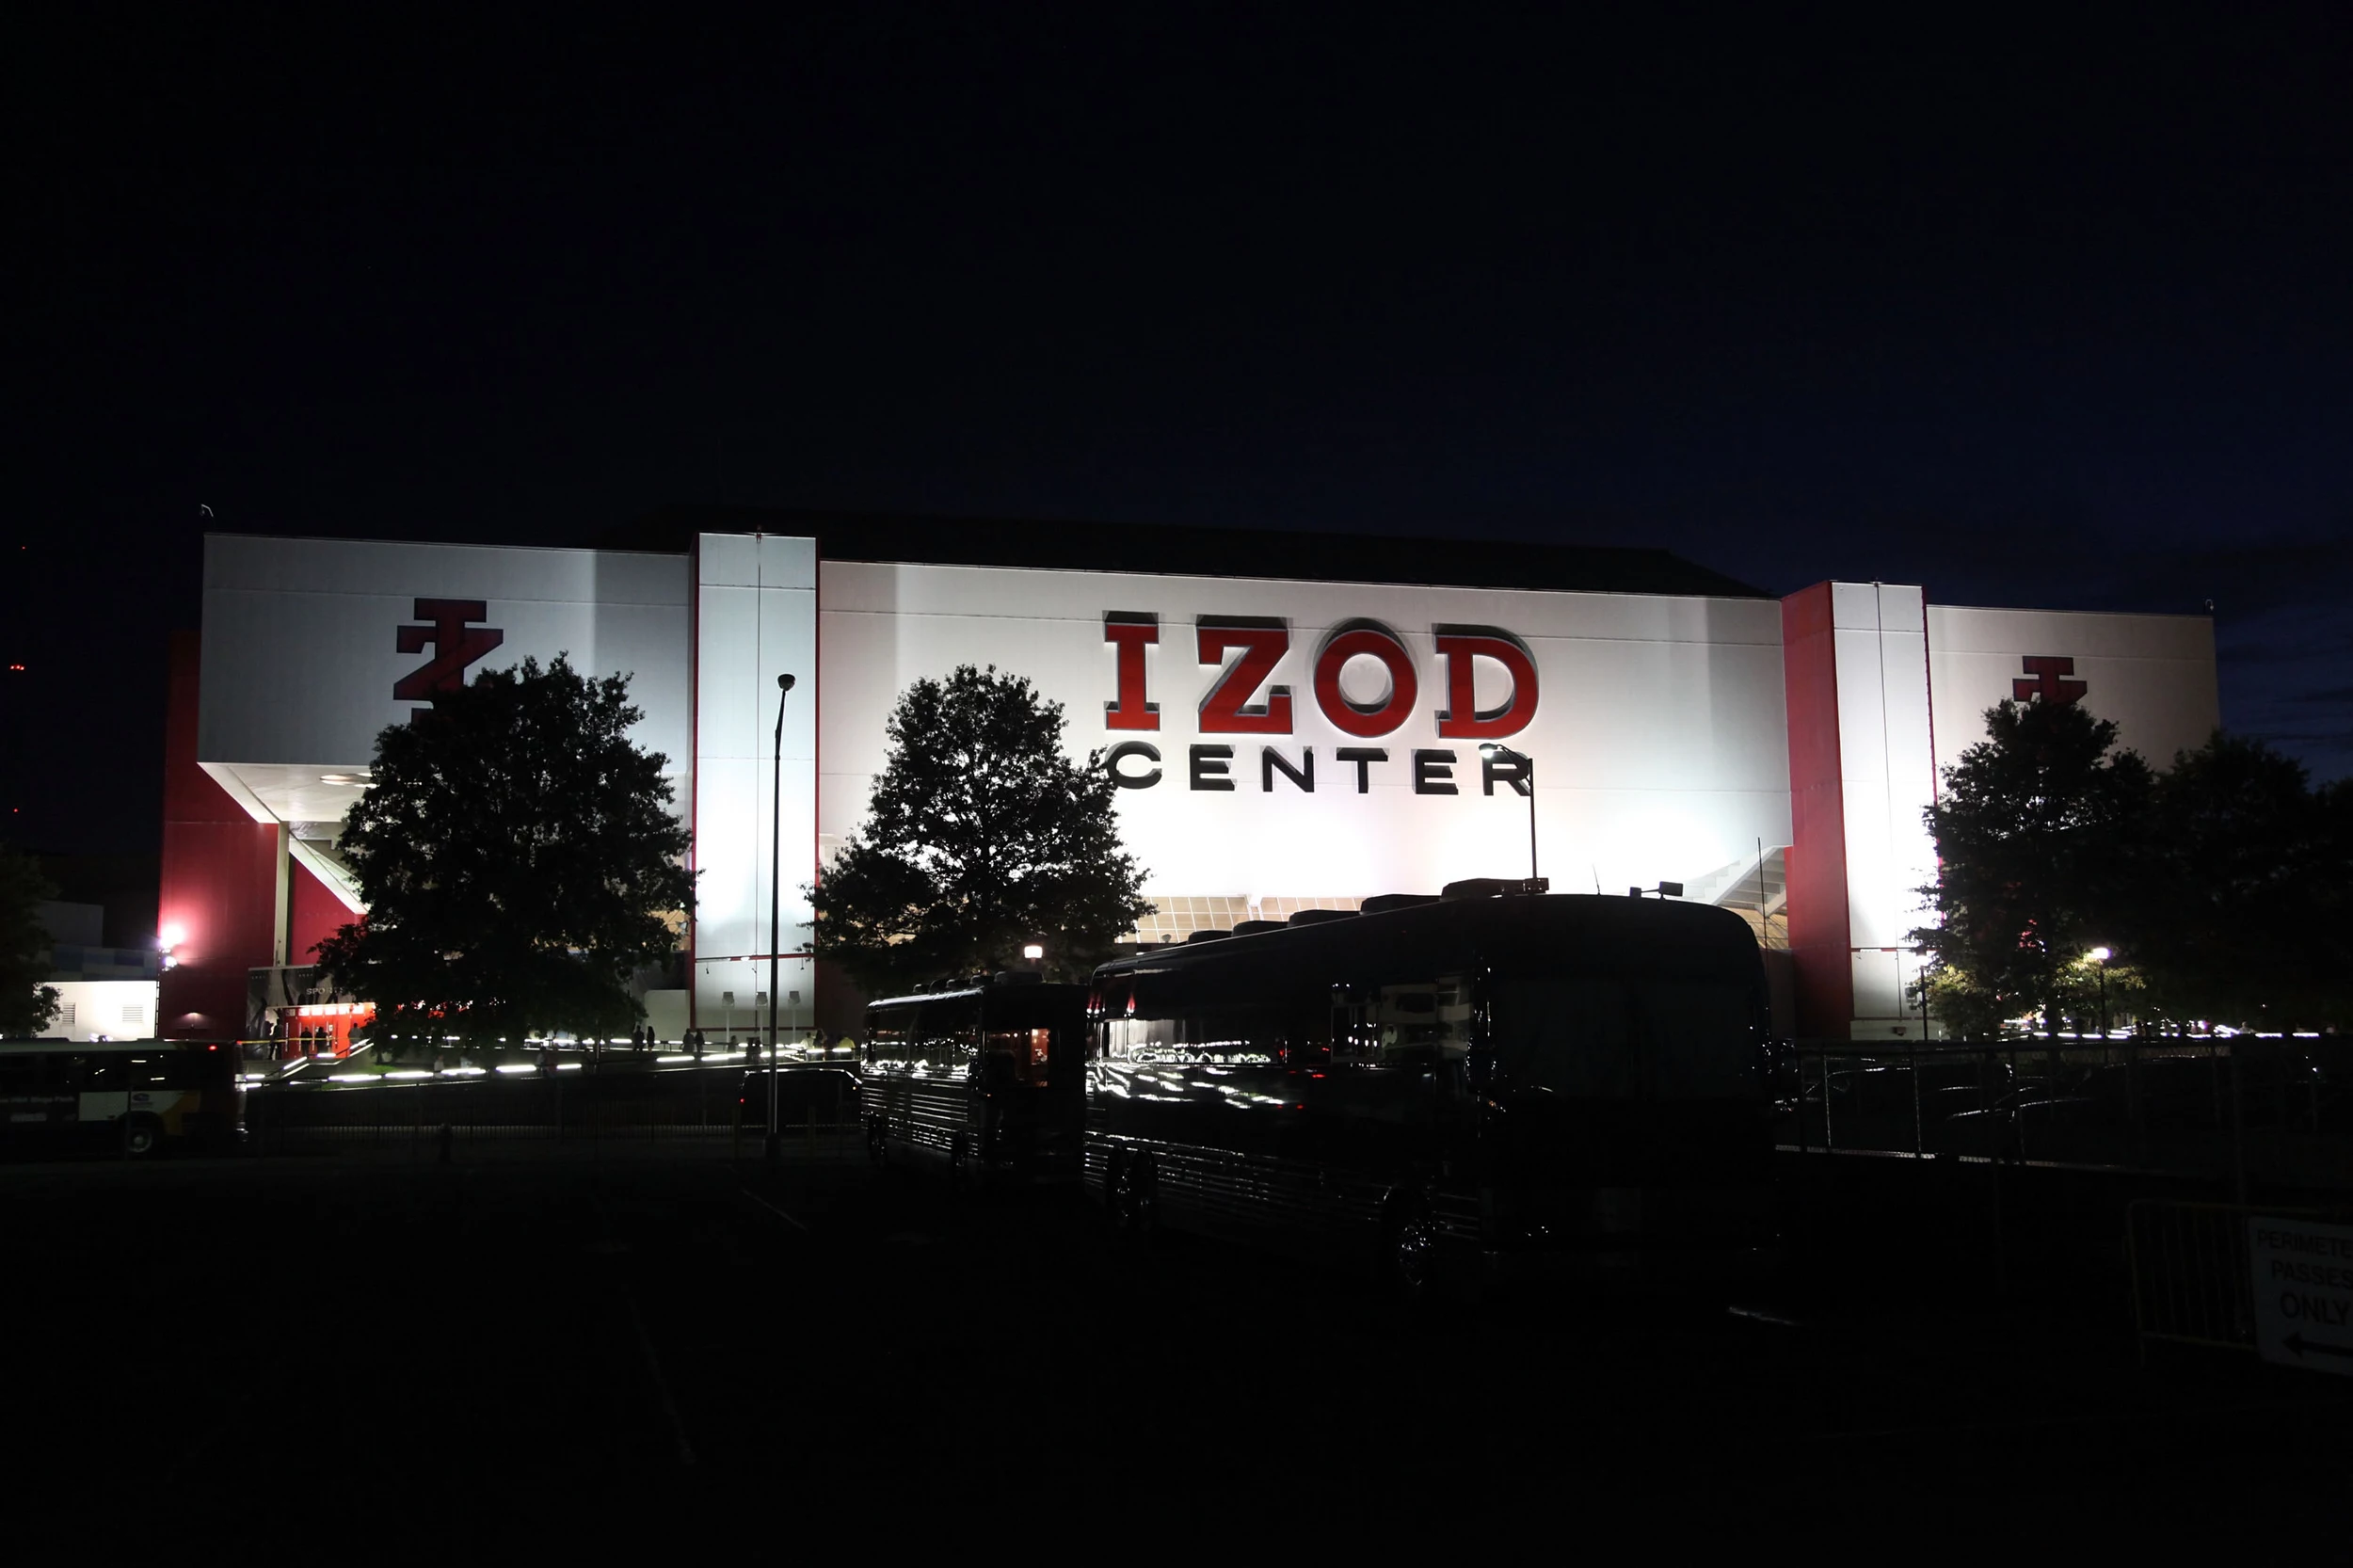 Whatever happened to the Continental Airlines Arena/Izod Center?